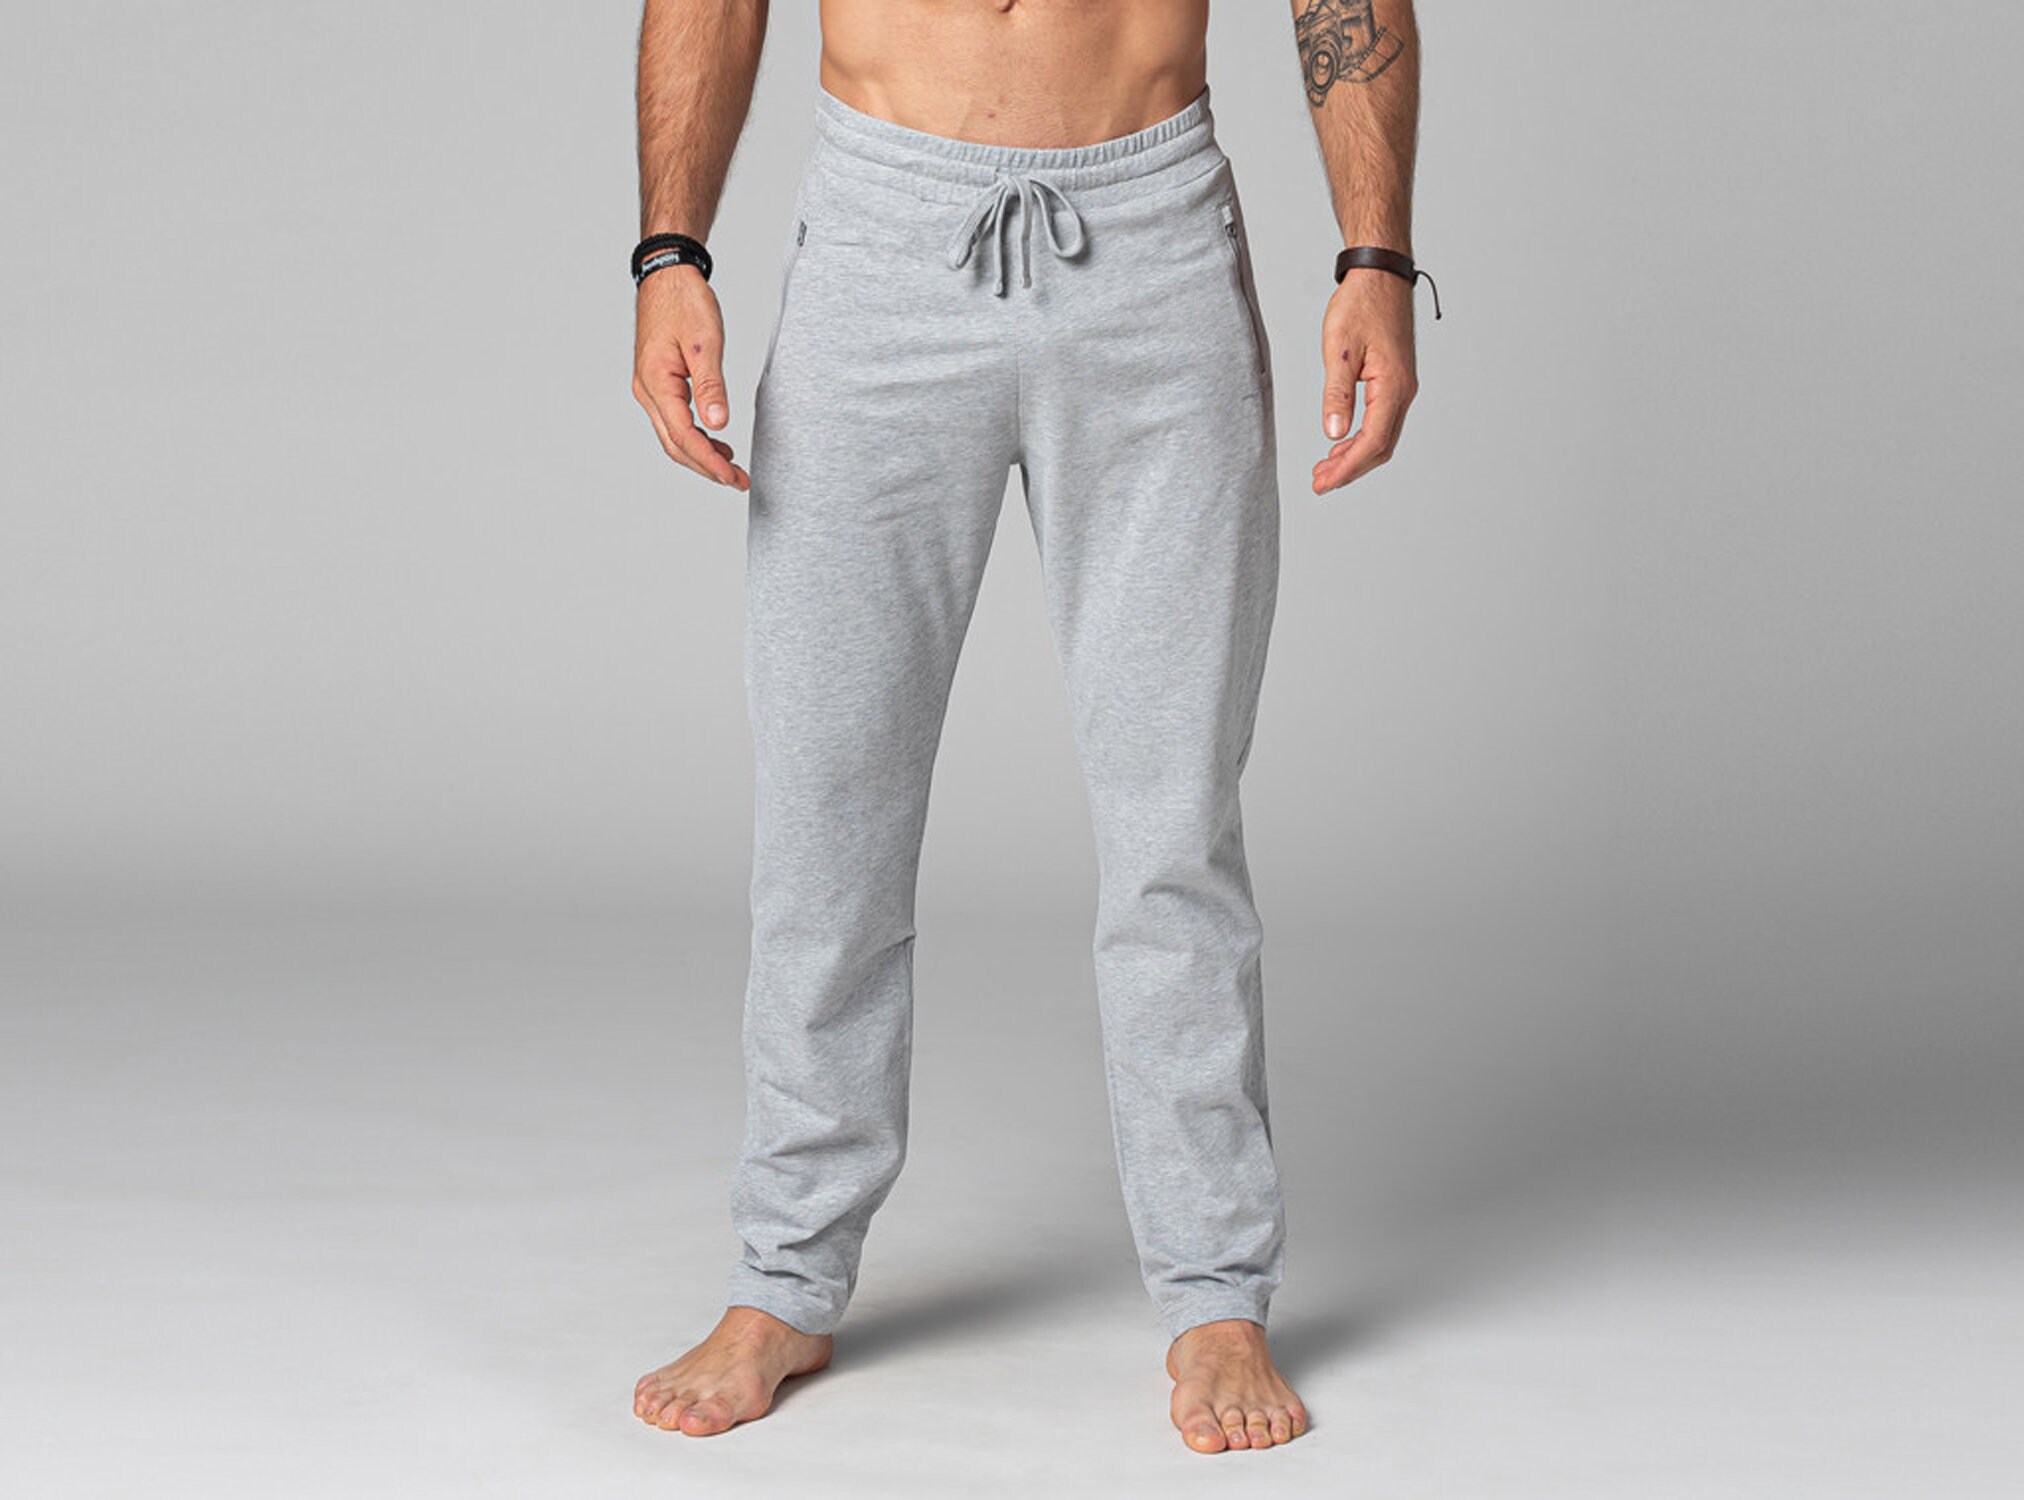 HOMME - CRANE° Organic Cotton Yoga Pants 95% Organic Cotton 5% Elastane  Made with Organically Grown cotton certified by Control Union CU812624  OKEO-TEX° Confidence in Textiles STANDARD 100 #Crane #GymLeggings #YogaPants  #Activewear